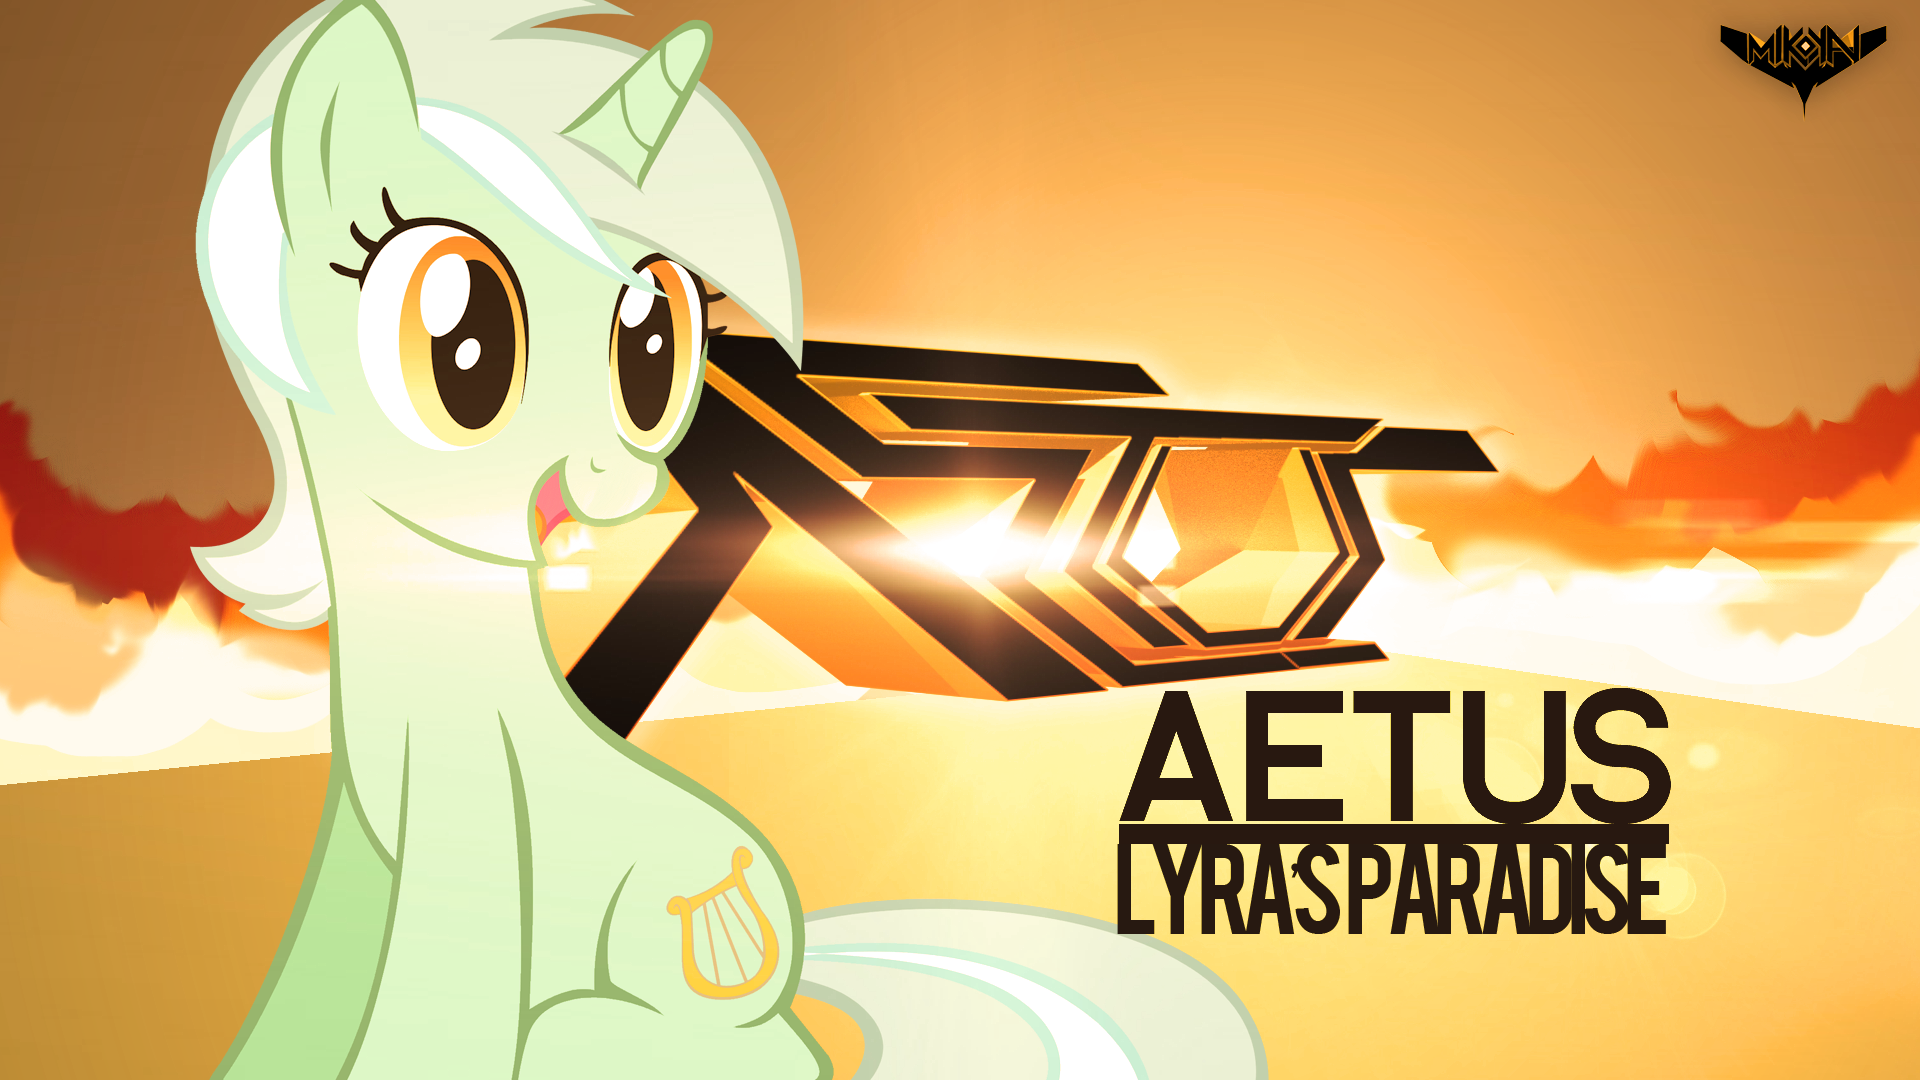 Aetus: Lyra's Paradise Cover Art by Kna and MikoyaNx